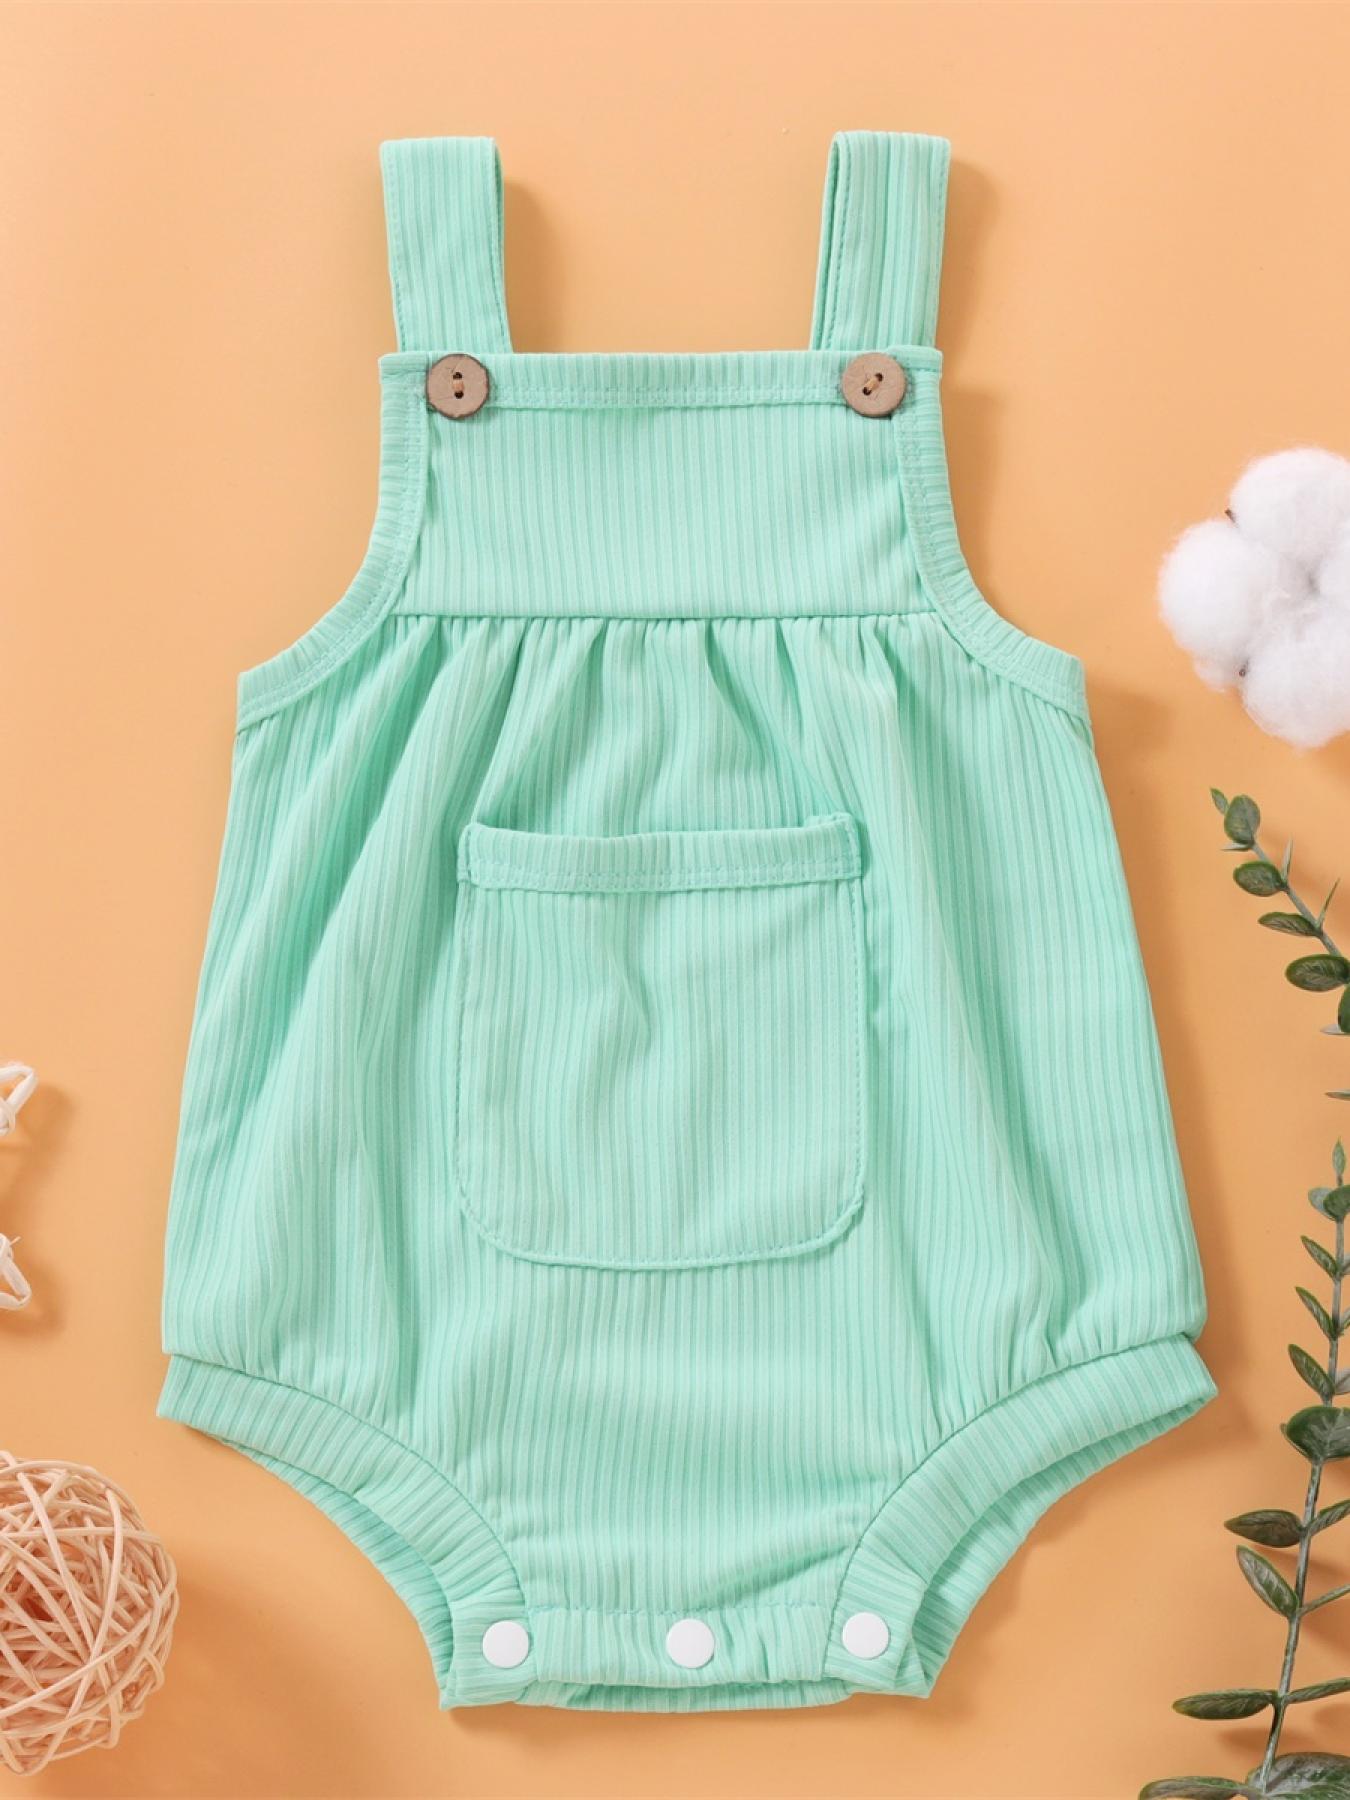 Solid Pocket Decor Sleeveless Baby Jumpsuit Overalls